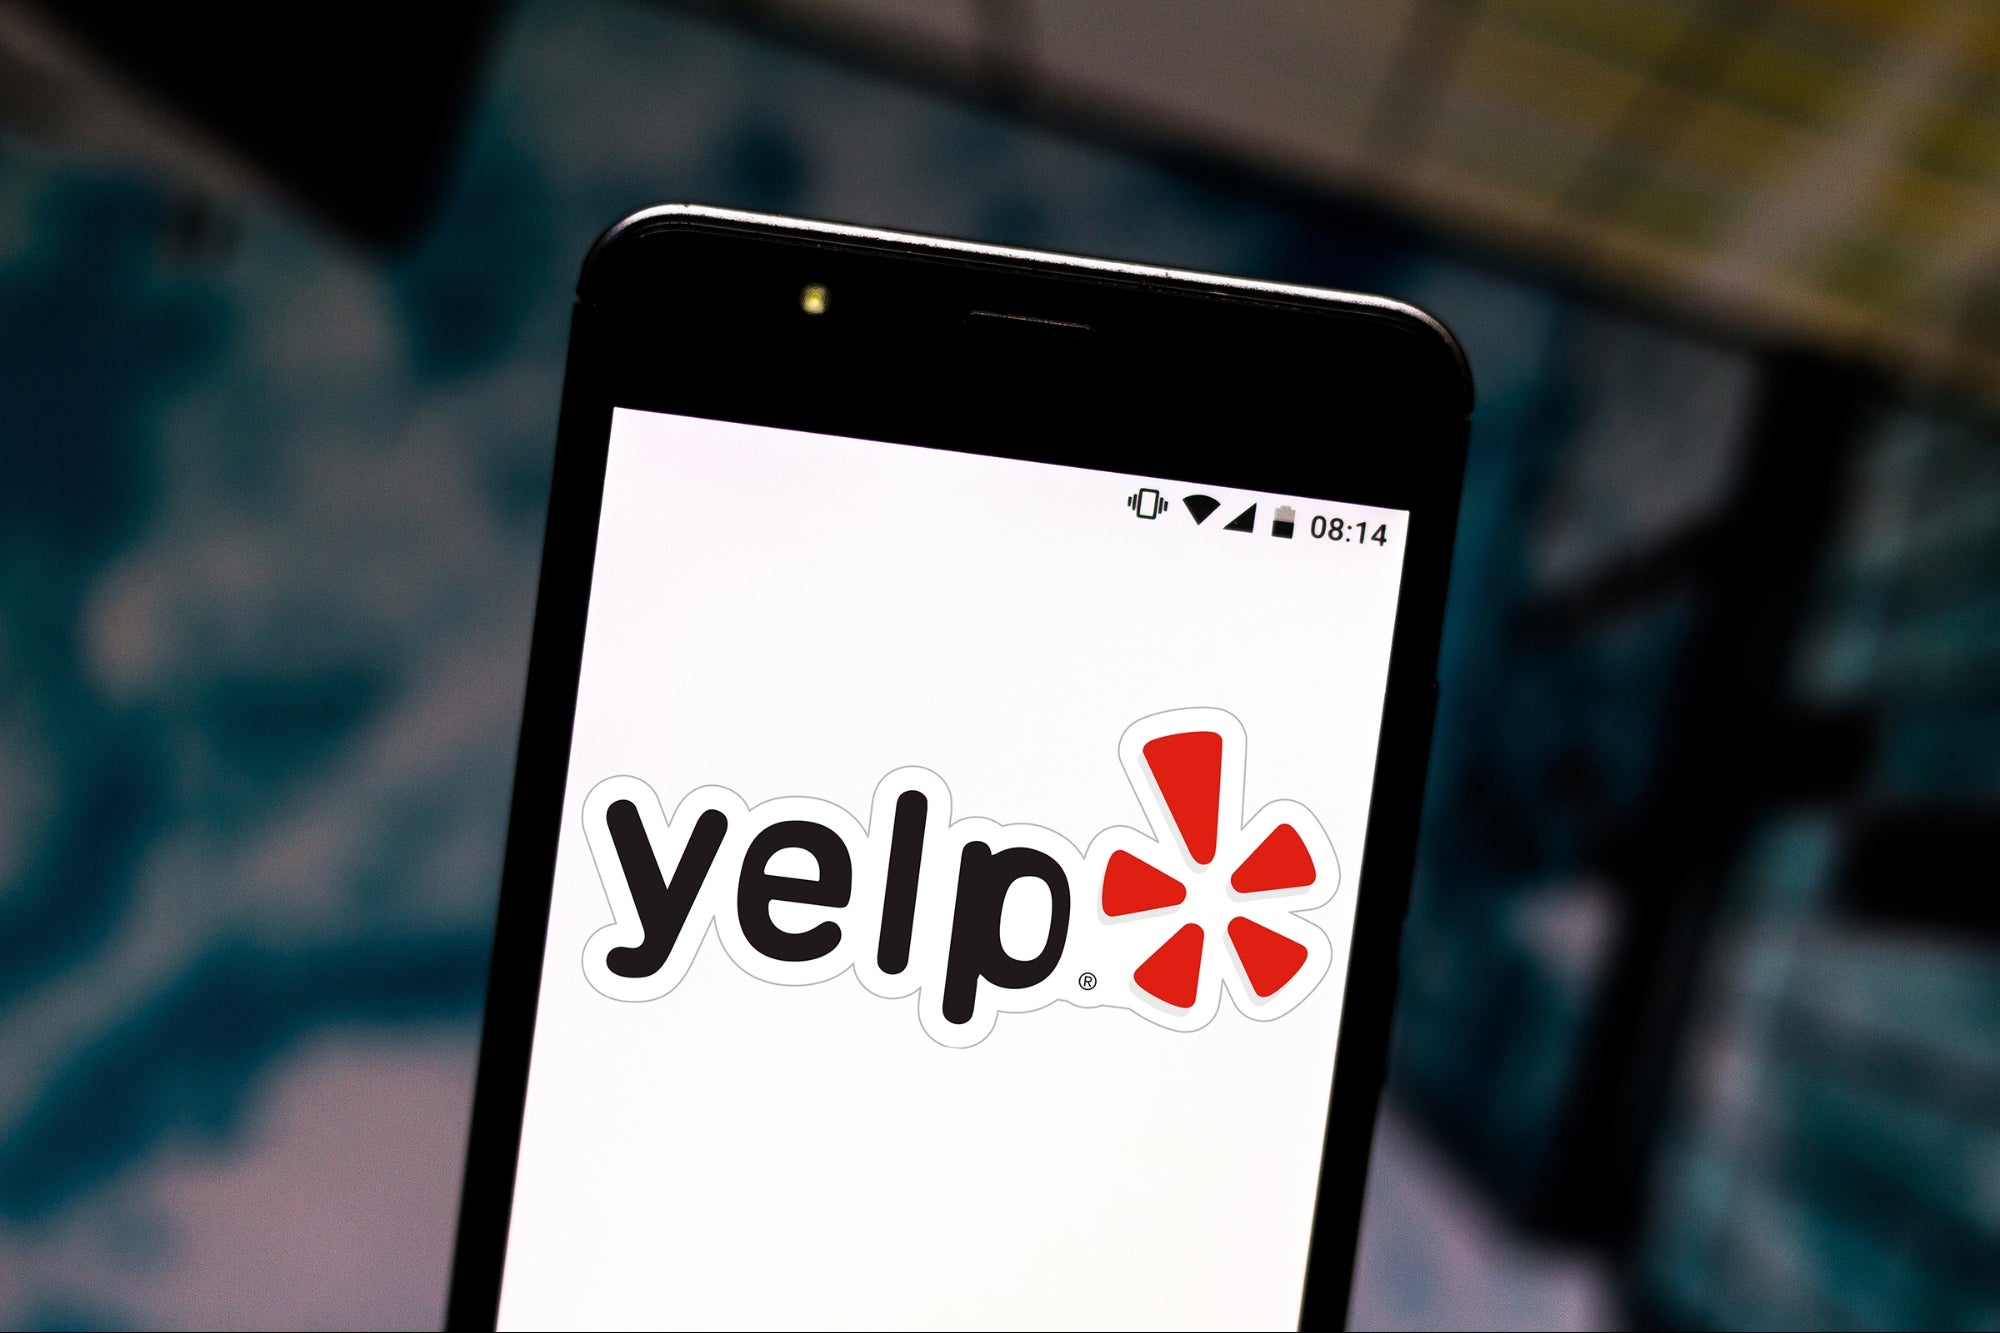 Yelp Now Offers a Feature That Allows Businesses to Specify COVID-19 Vaccine Requirements for Customers and Staff